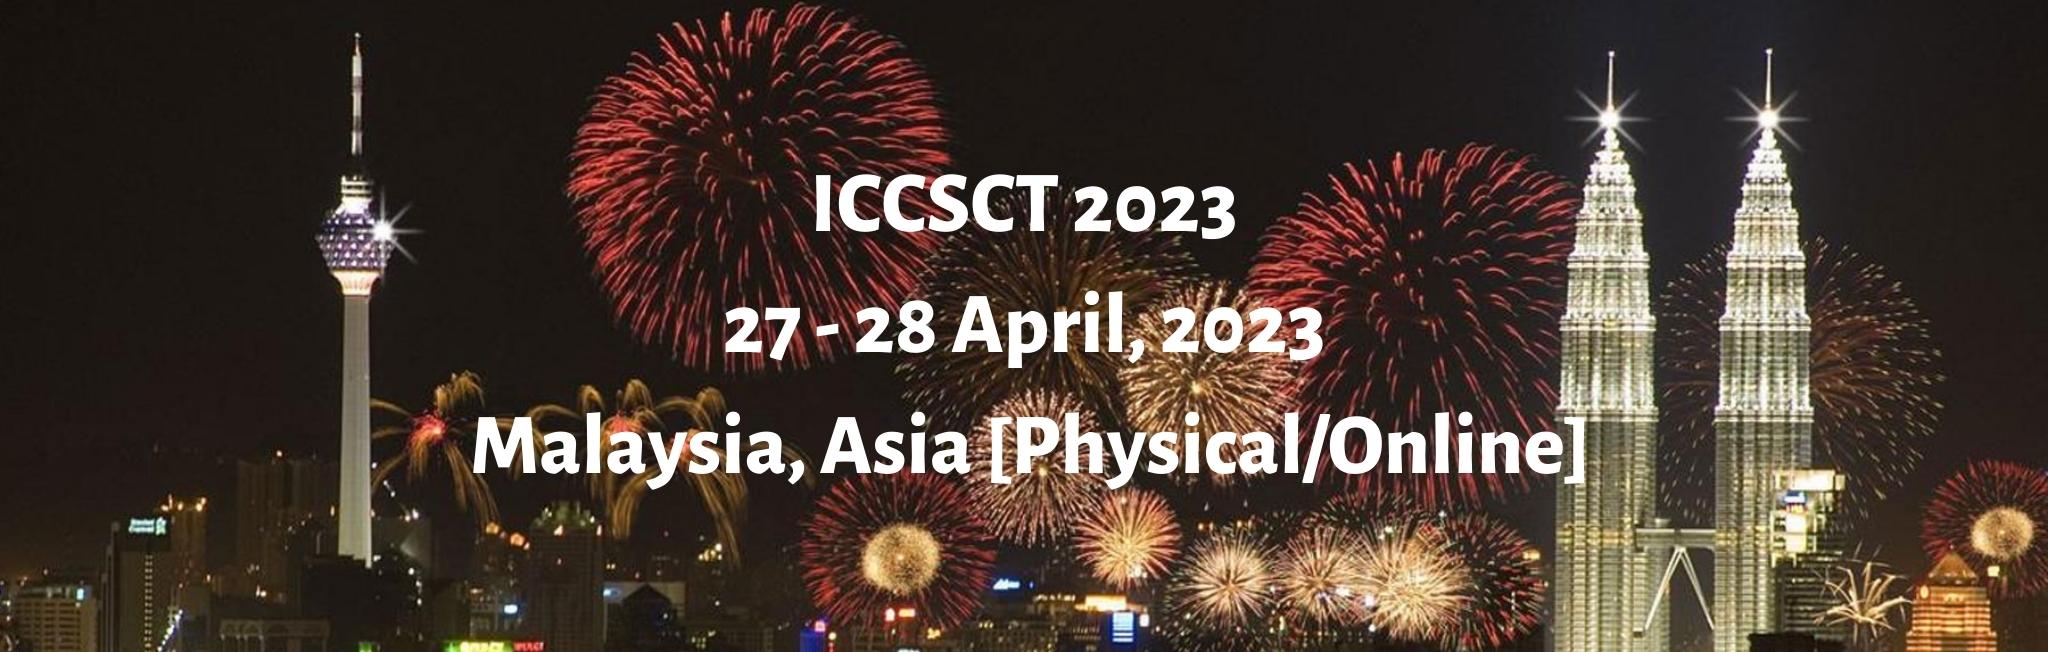 International Conference on Cyber Security and Connected Technologies 2023, Kuala Lumpur, Malaysia